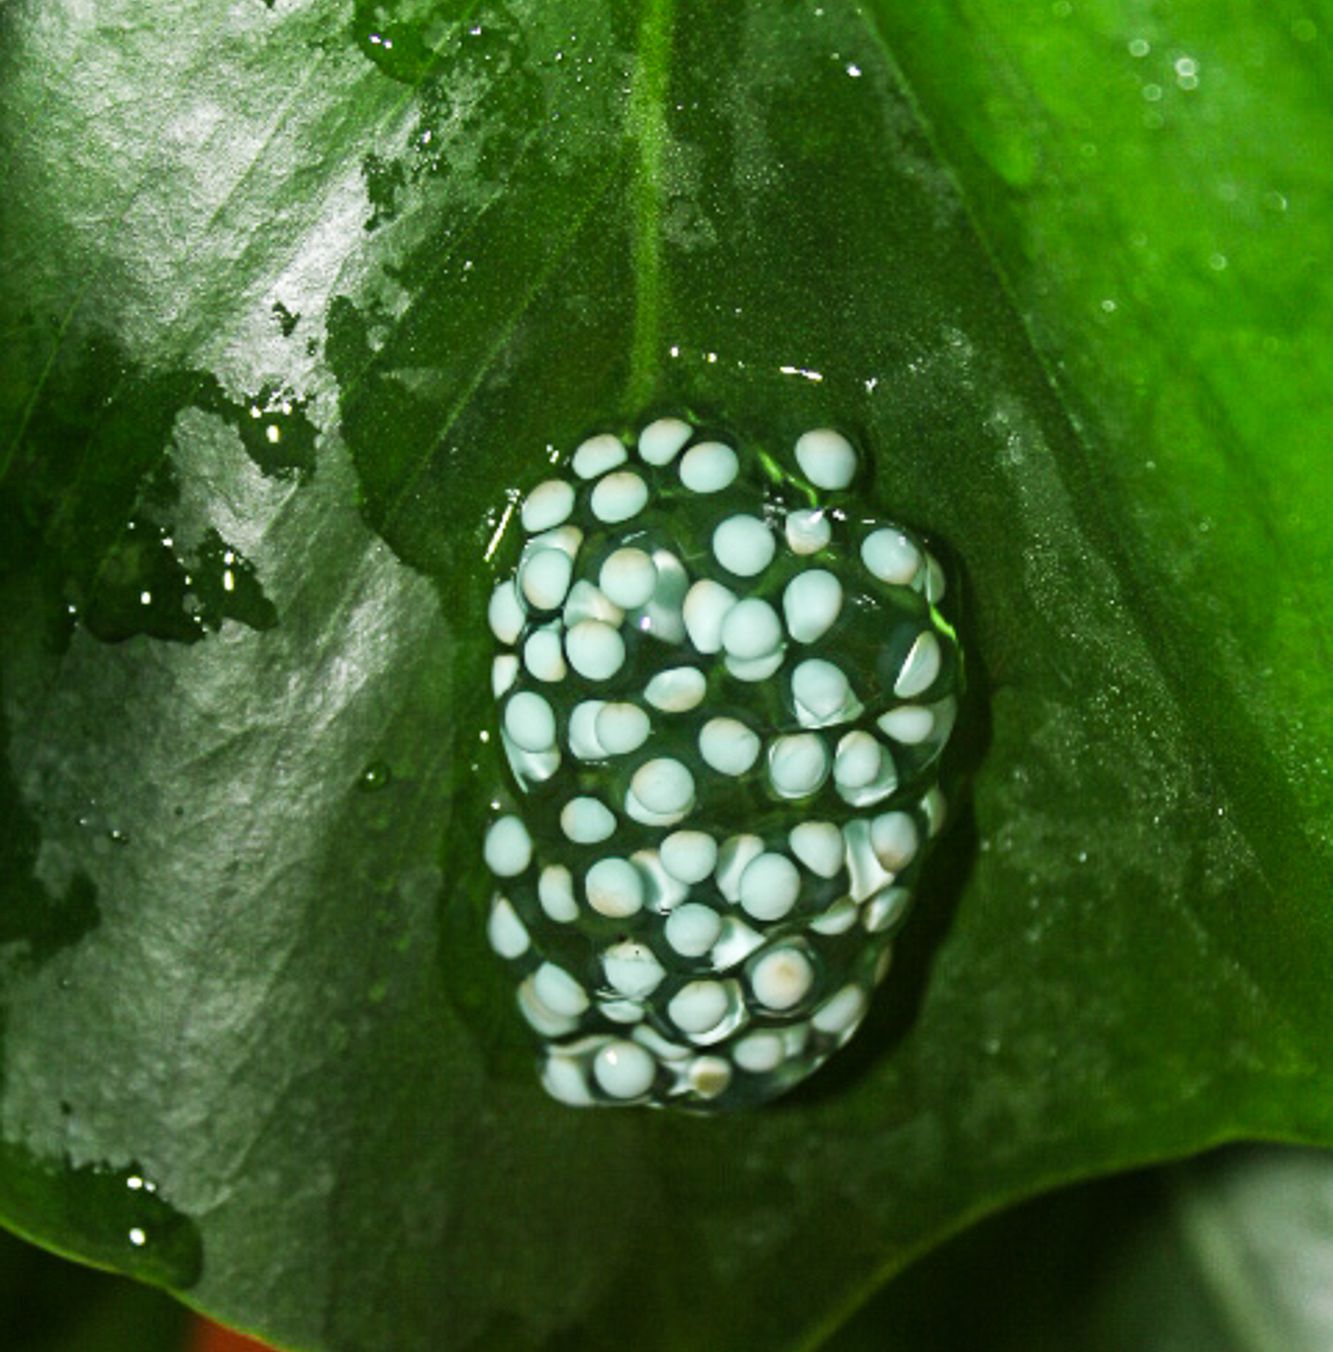 A clutch of eggs laid by a red-eyed tree frog. After the female has laid the eggs, the male fertilises them. Each white nucleus will become a tadpole and eventually a froglet
